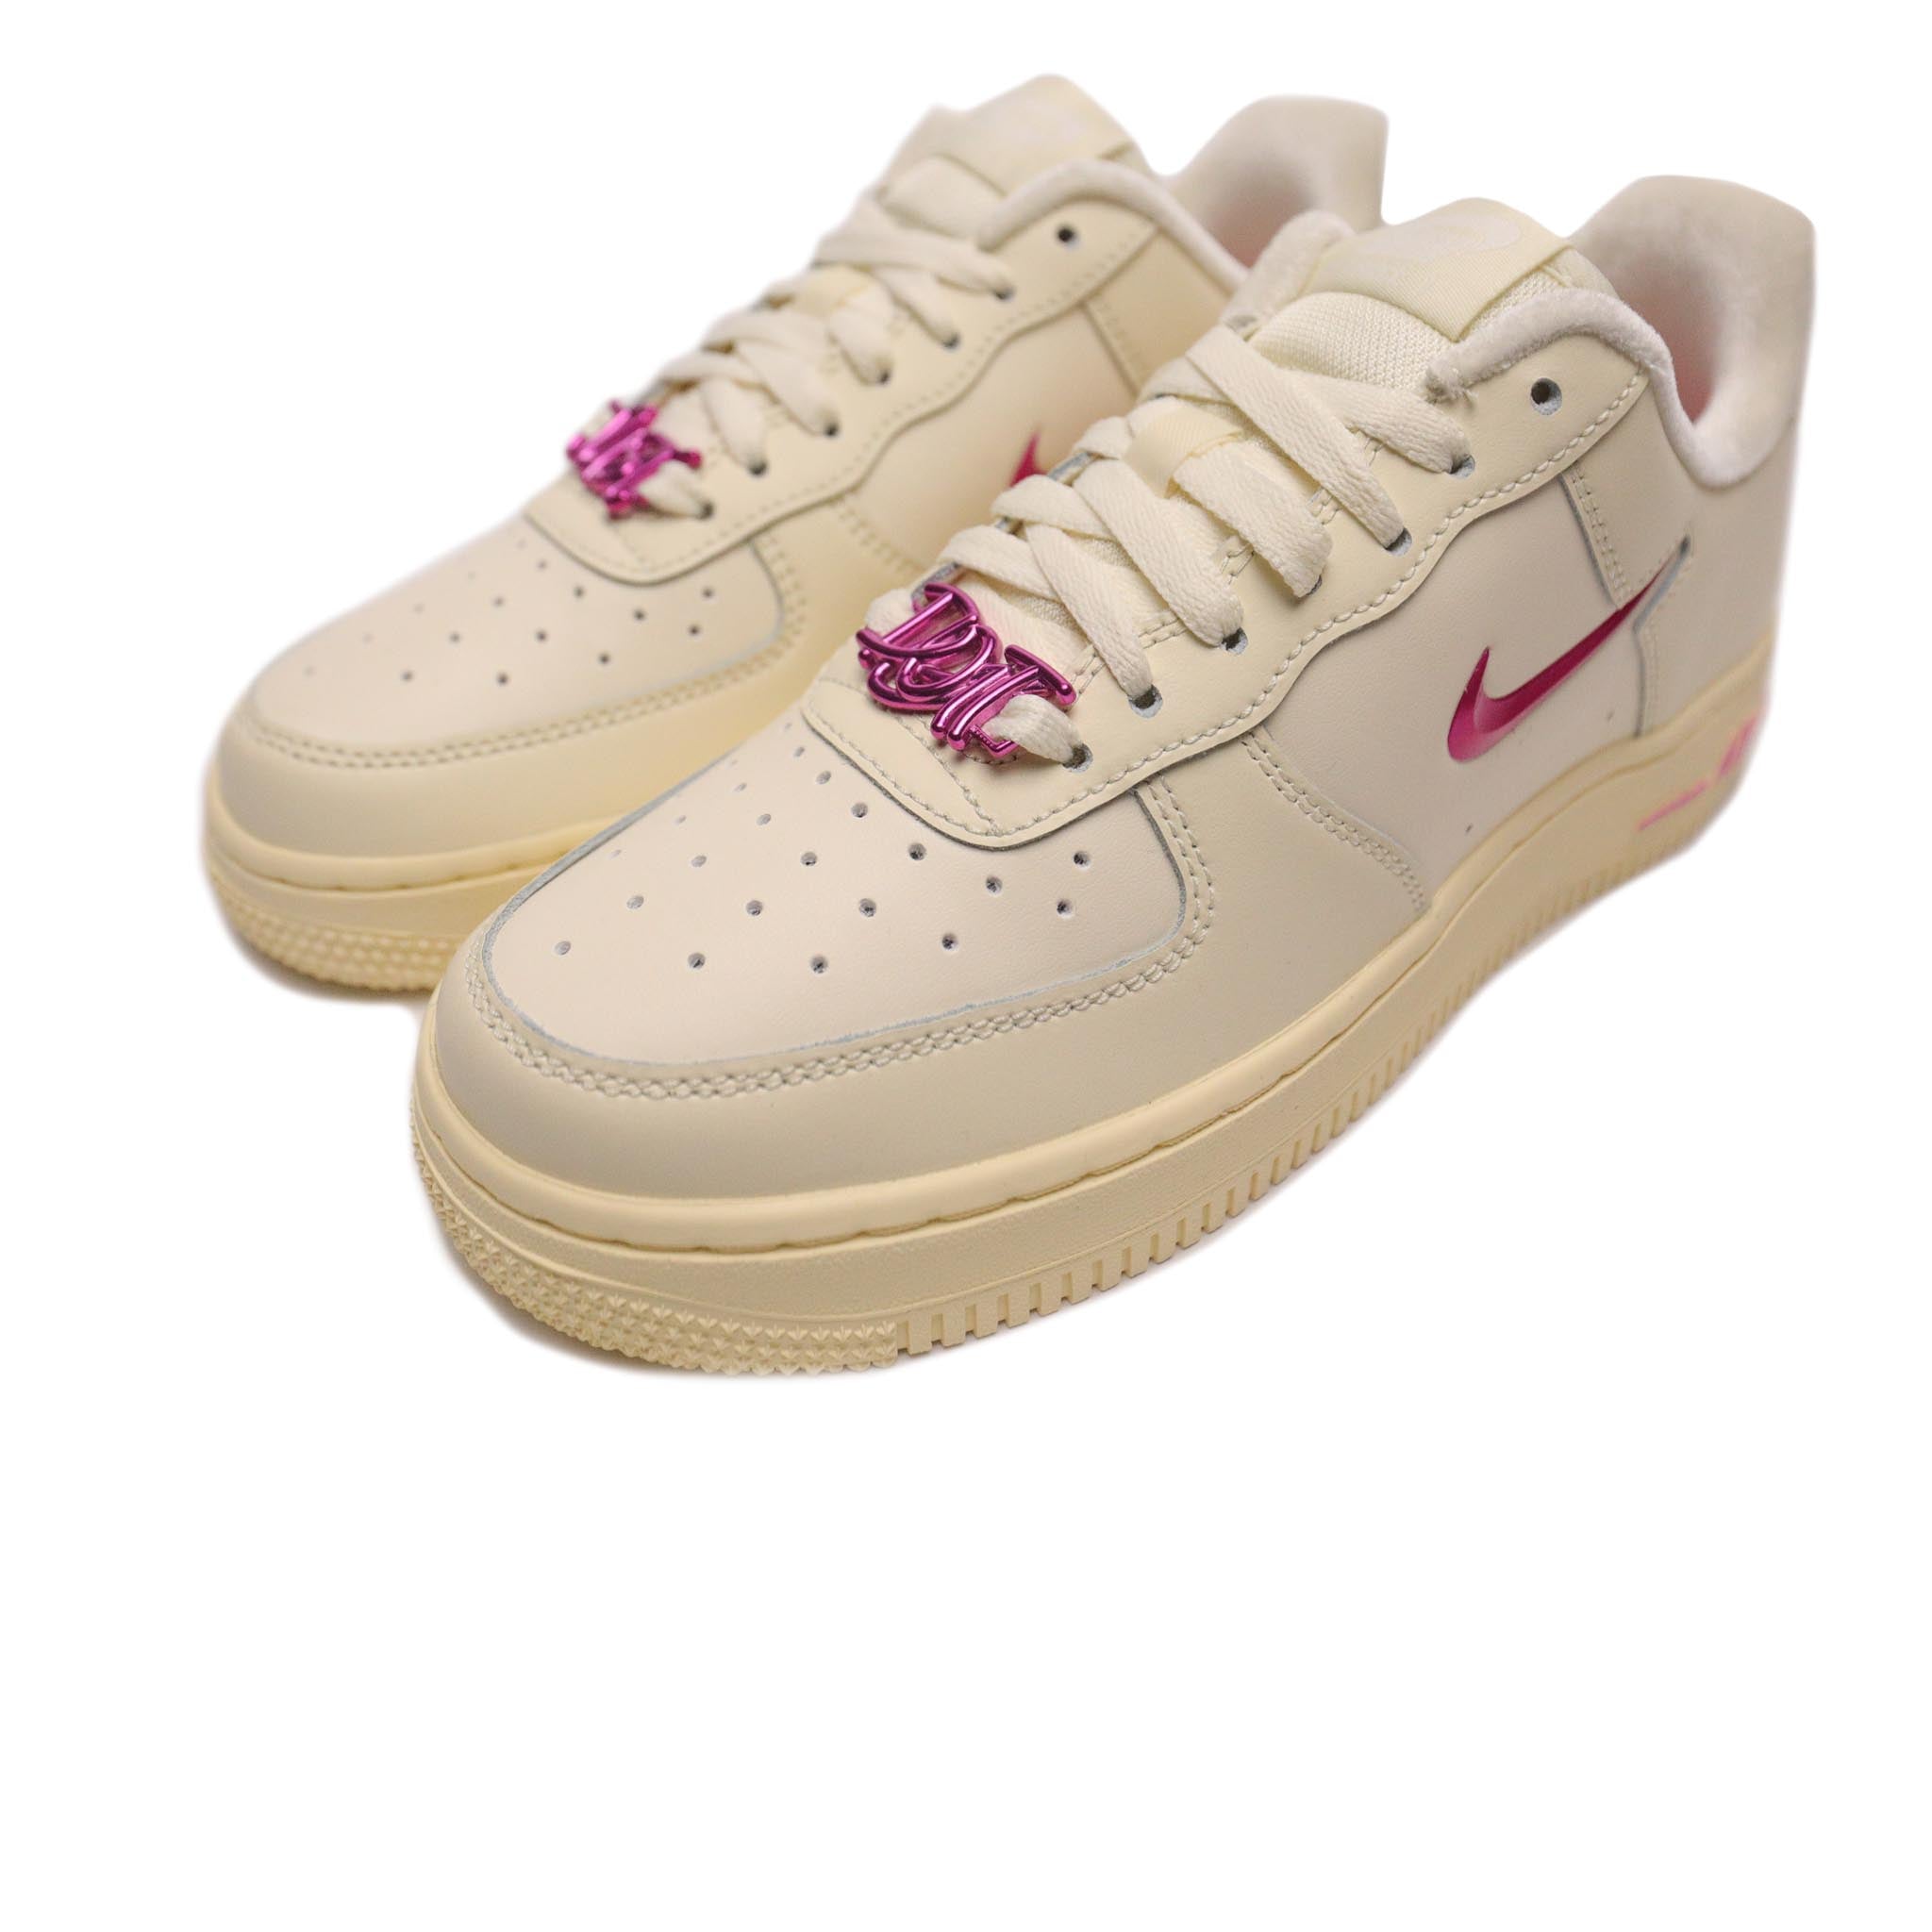 Nike Air Force 1 '07 SE 'Just Do It' Coconut Milk/Playful Pink